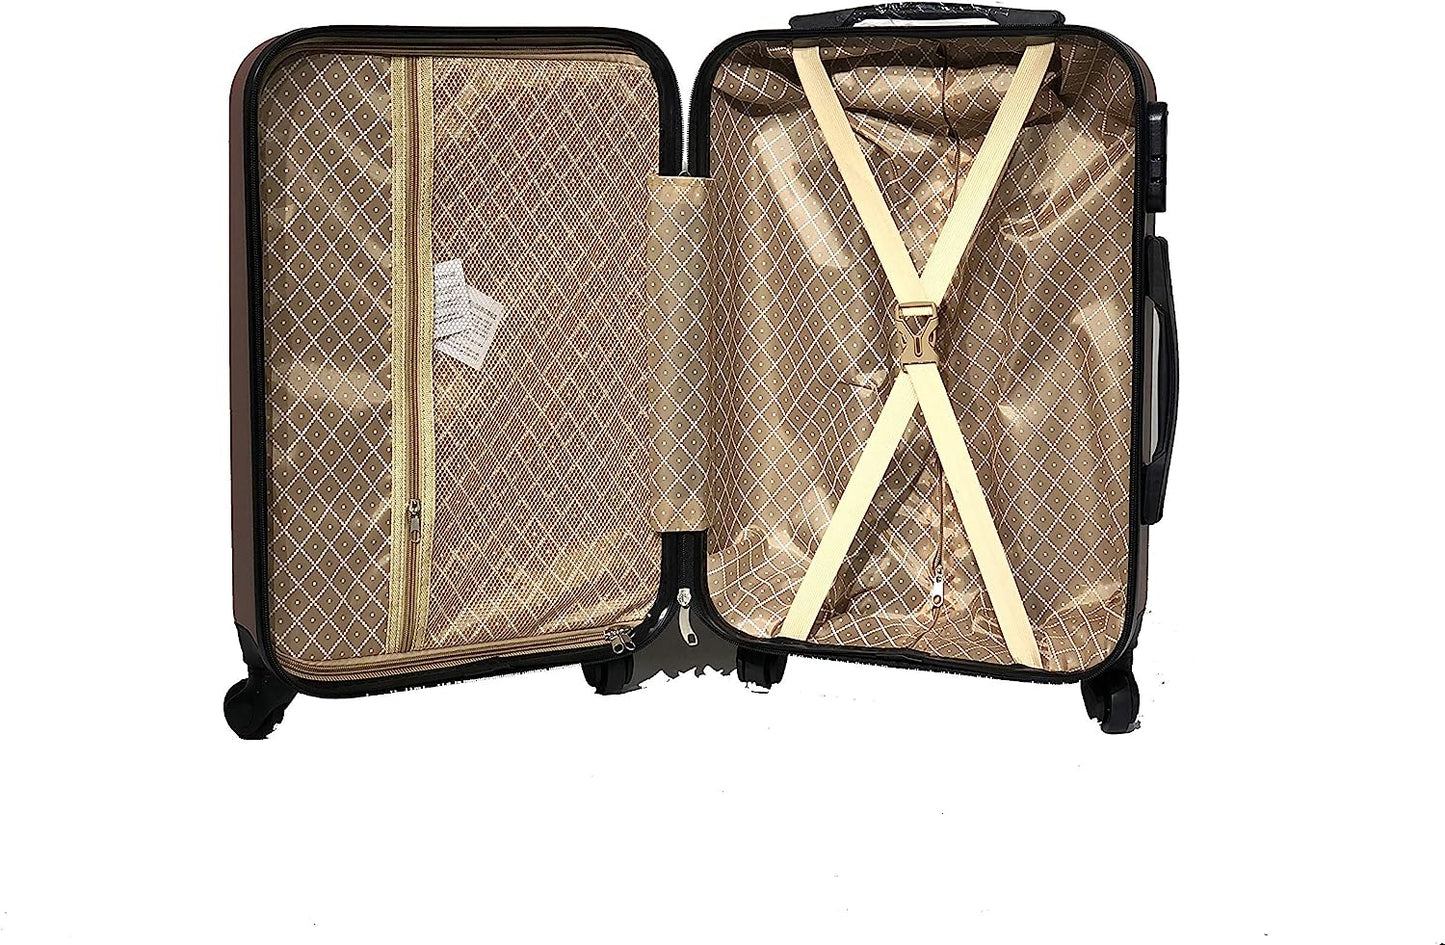 CELIMS - VALISE 55cm - BAGAGE TAILLE CABINE - 4 Roues - ABS - Rigide- Rose Gold